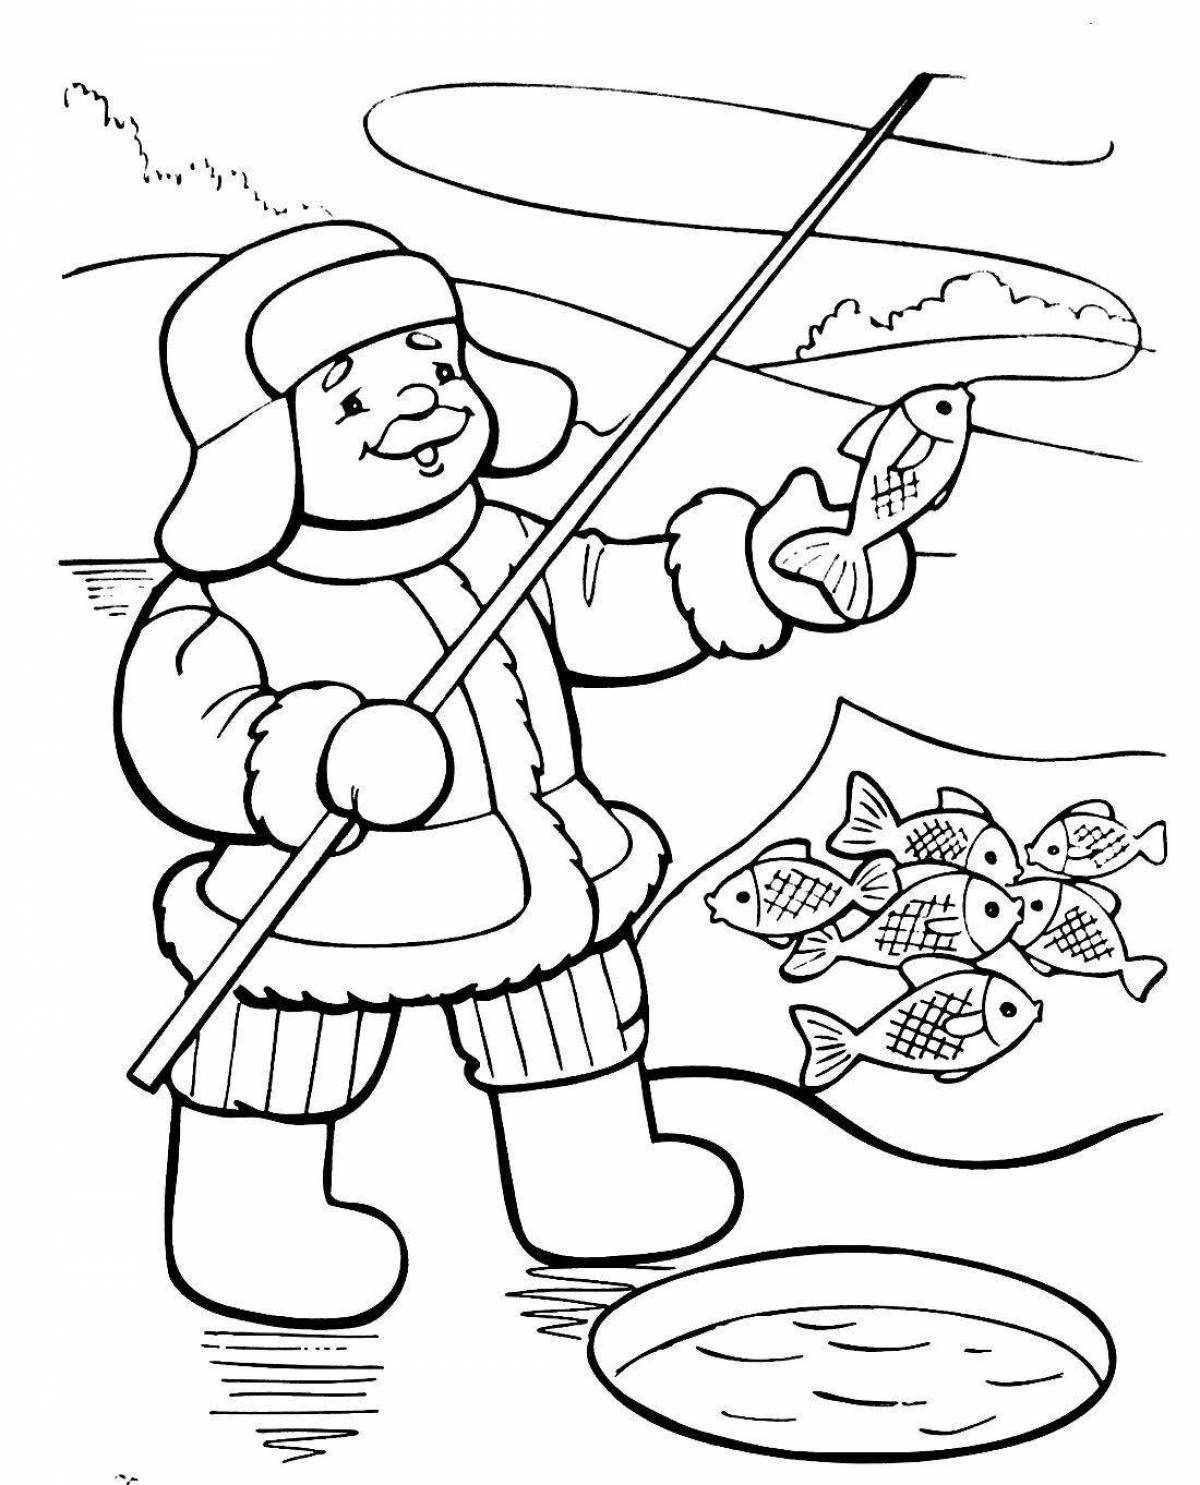 Exciting fisherman coloring book for kids